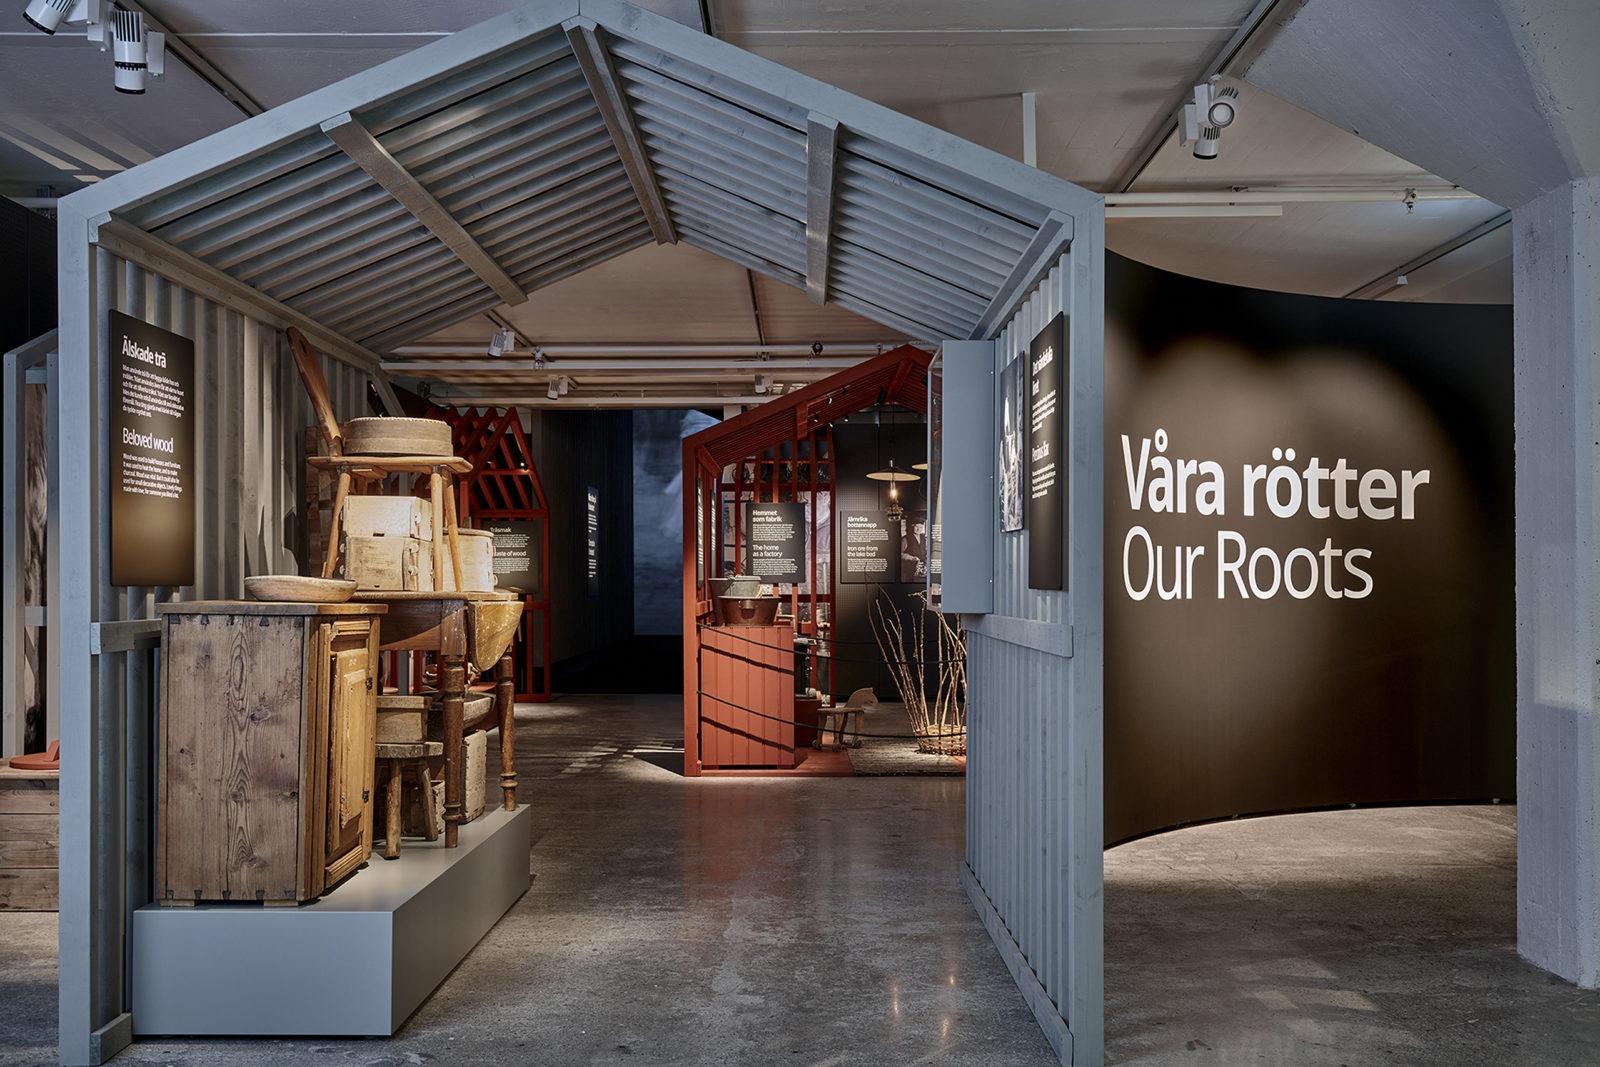 Explore IKEA Museum and get new perspectives - IKEA Museum